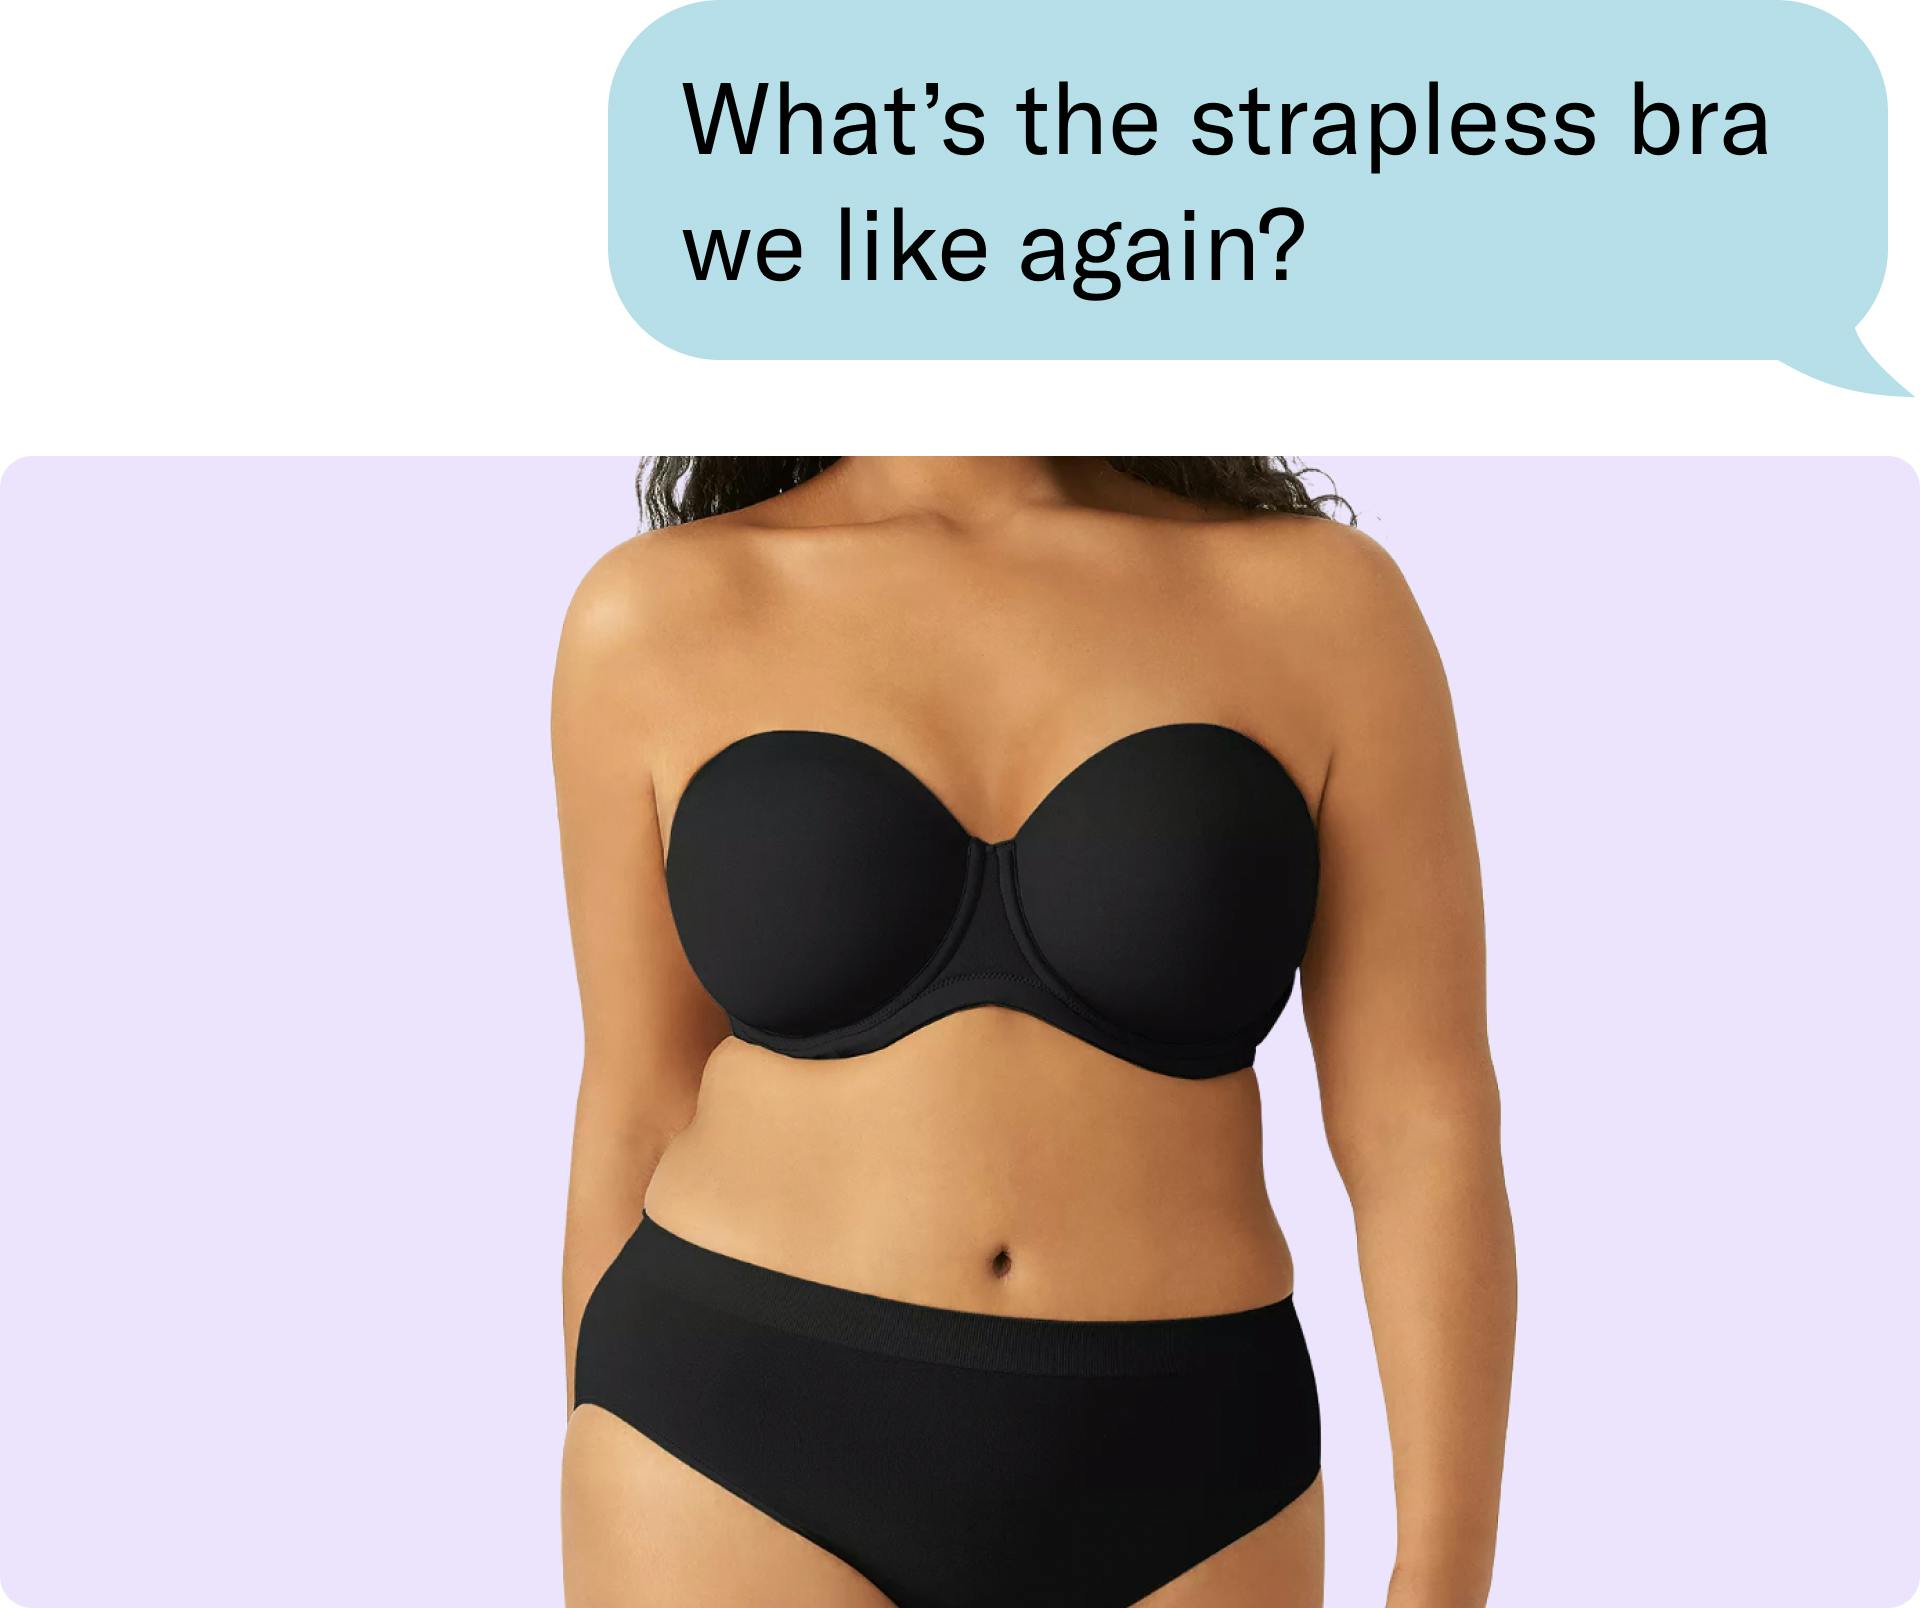 What’s the strapless bra we like again?